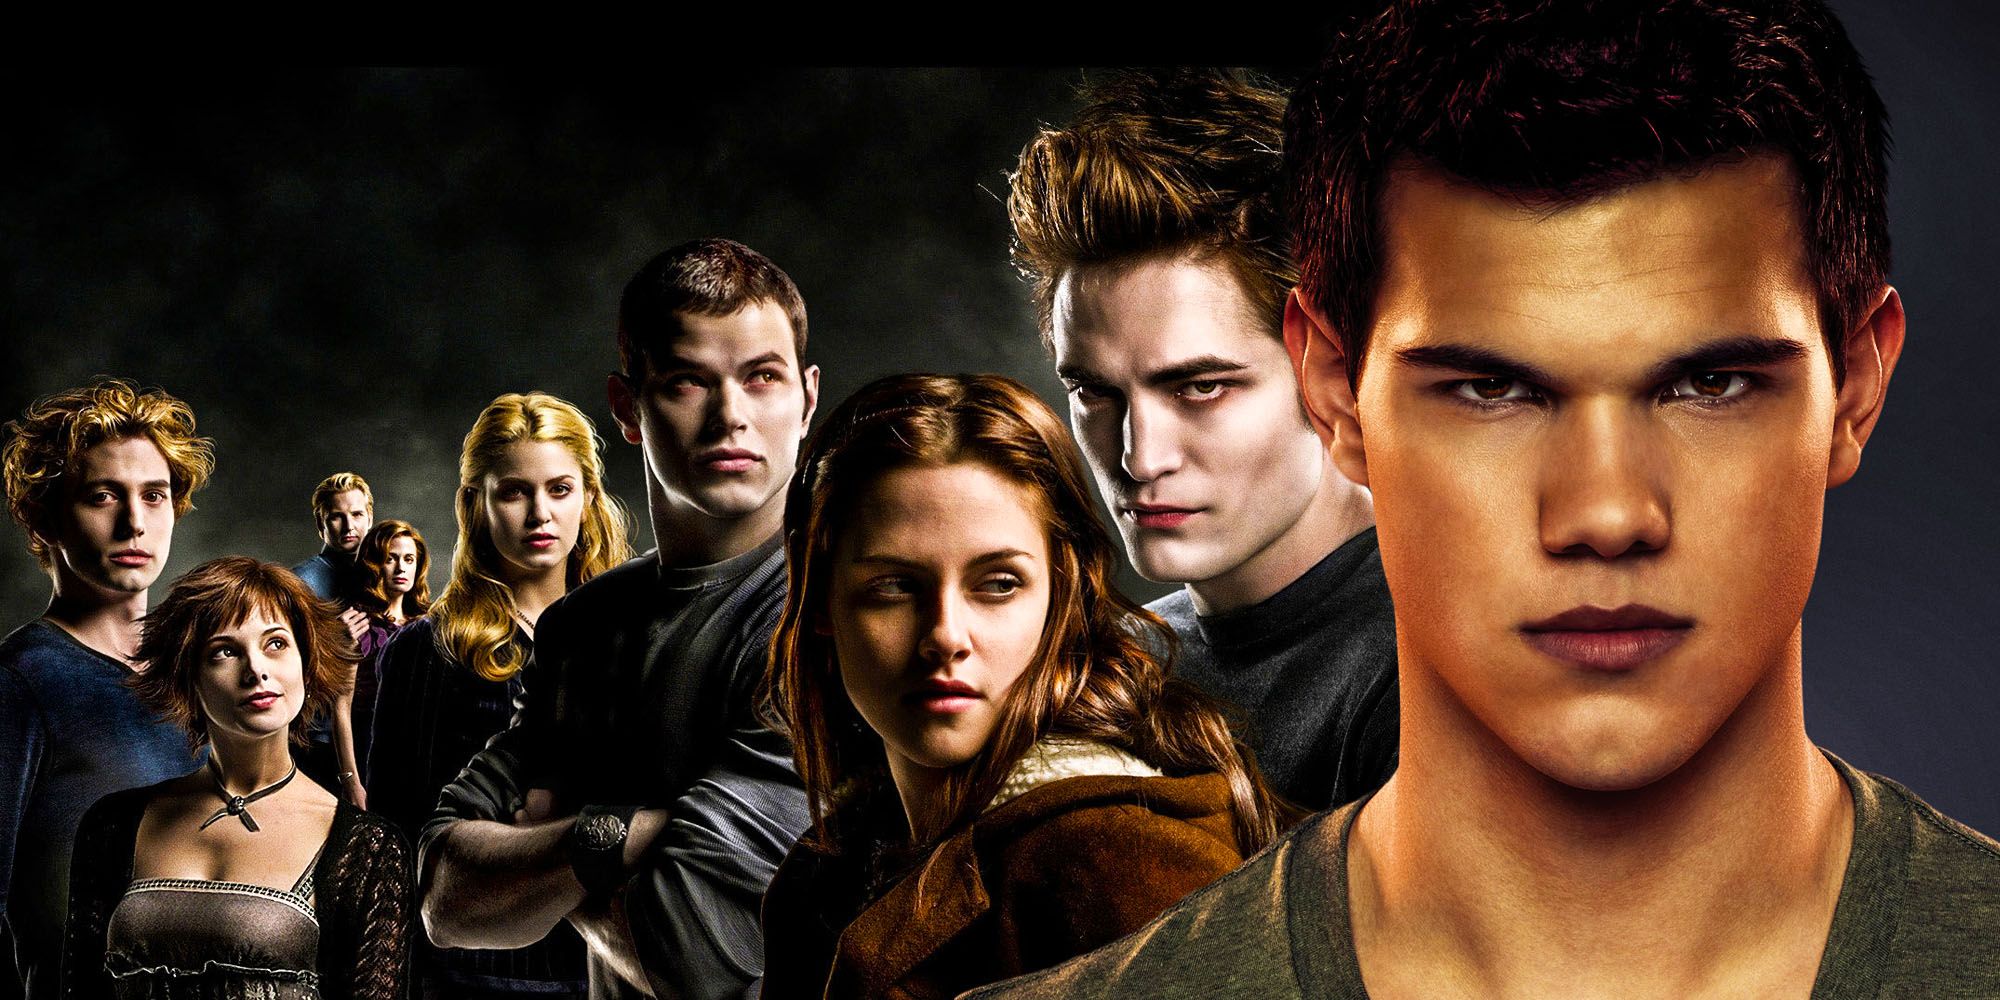 Is Twilight Really That Bad? Why The Movies Got So Much Hate